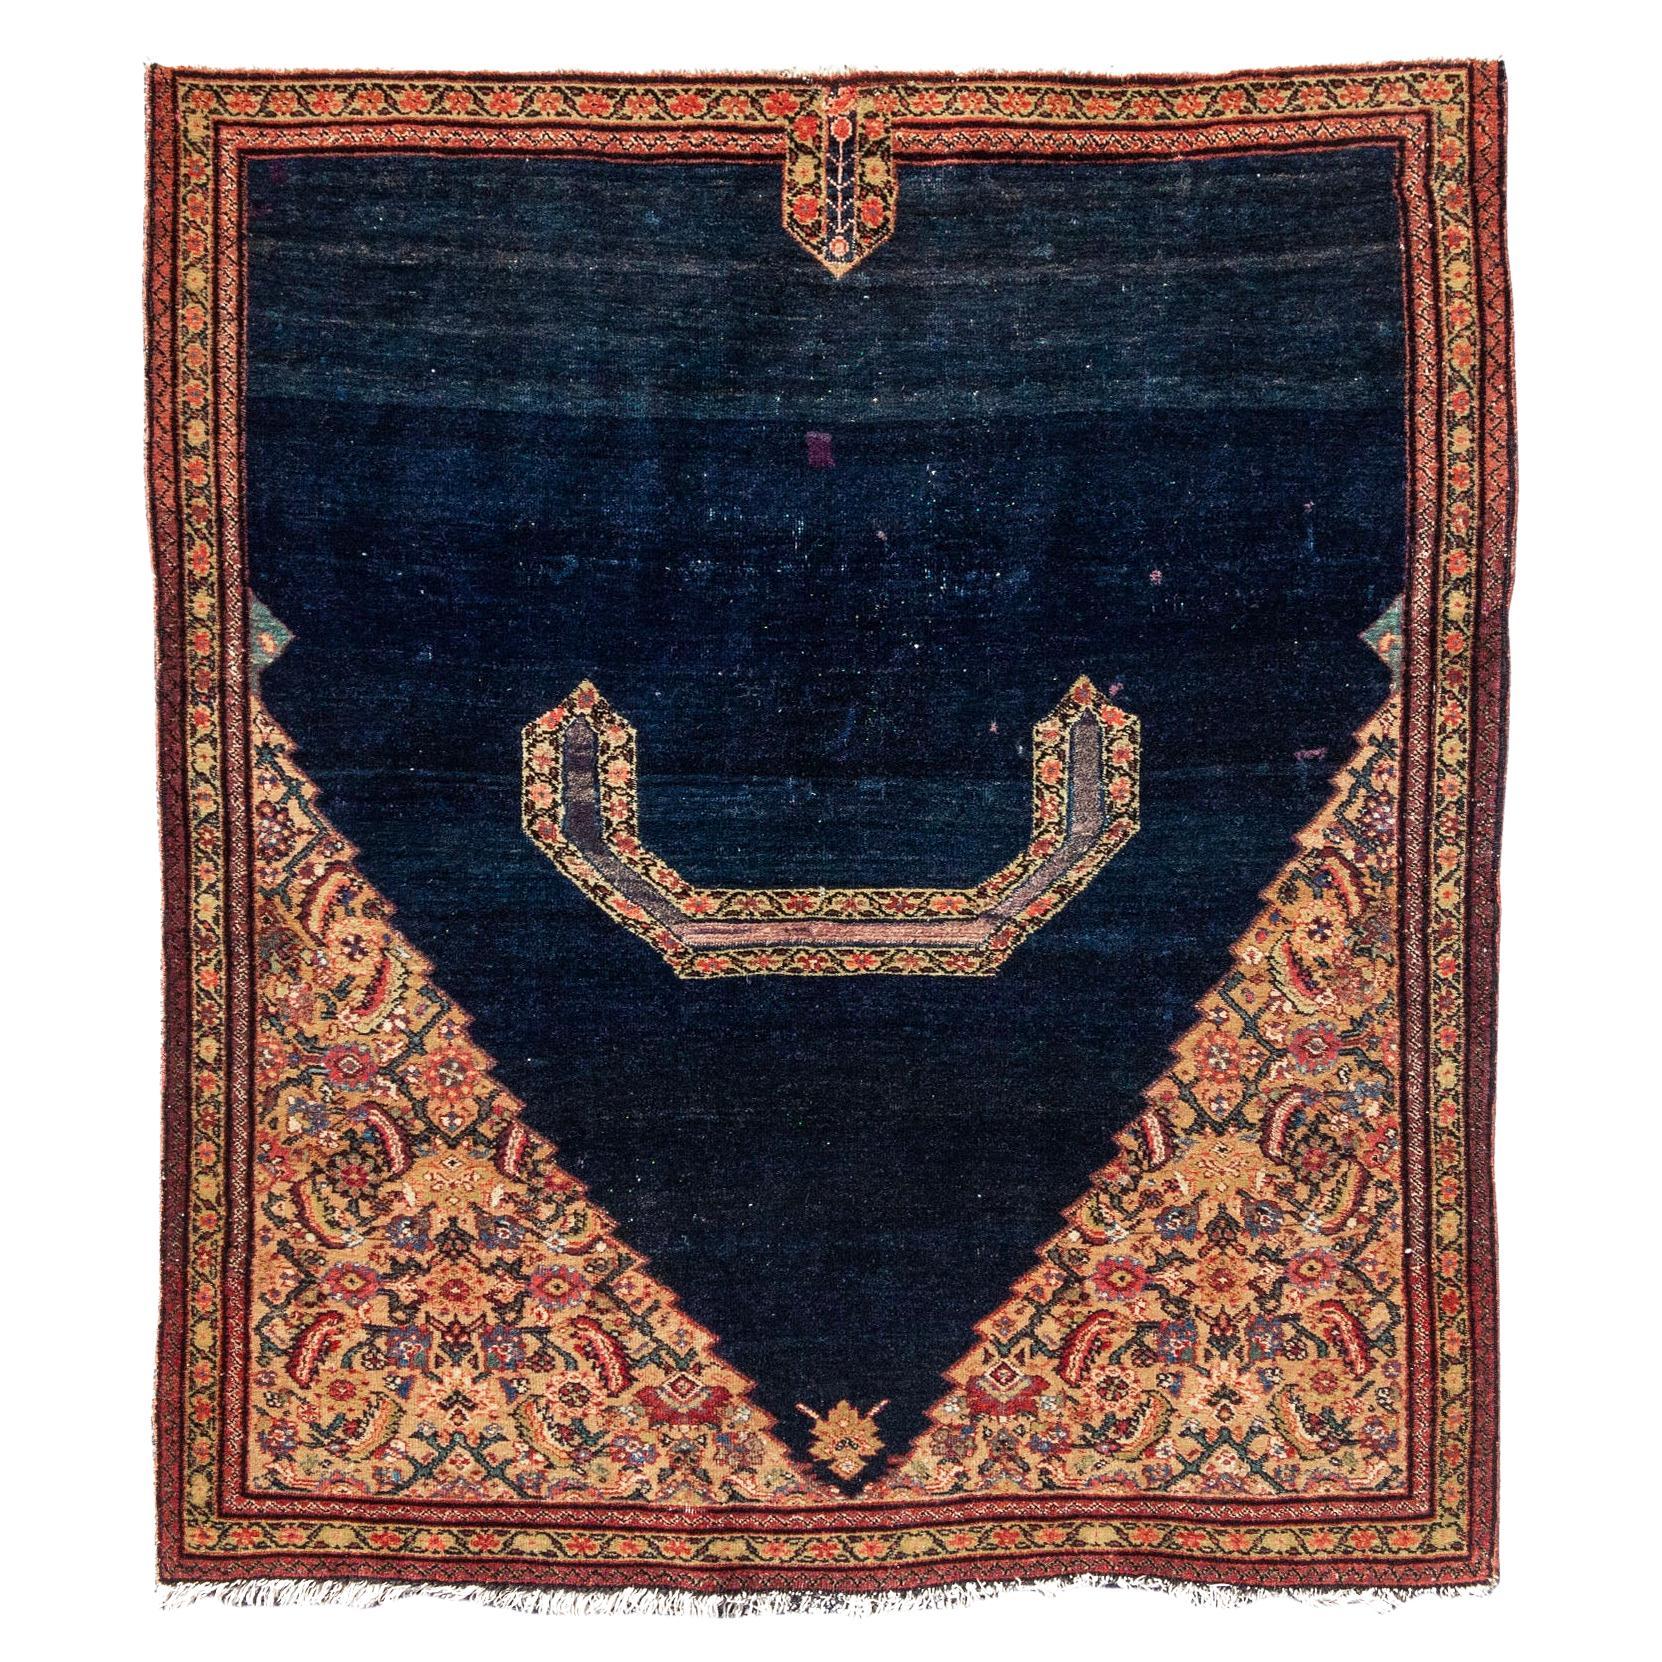 Antique Persian Fereghan Saddle Cover, Late 19th Century For Sale